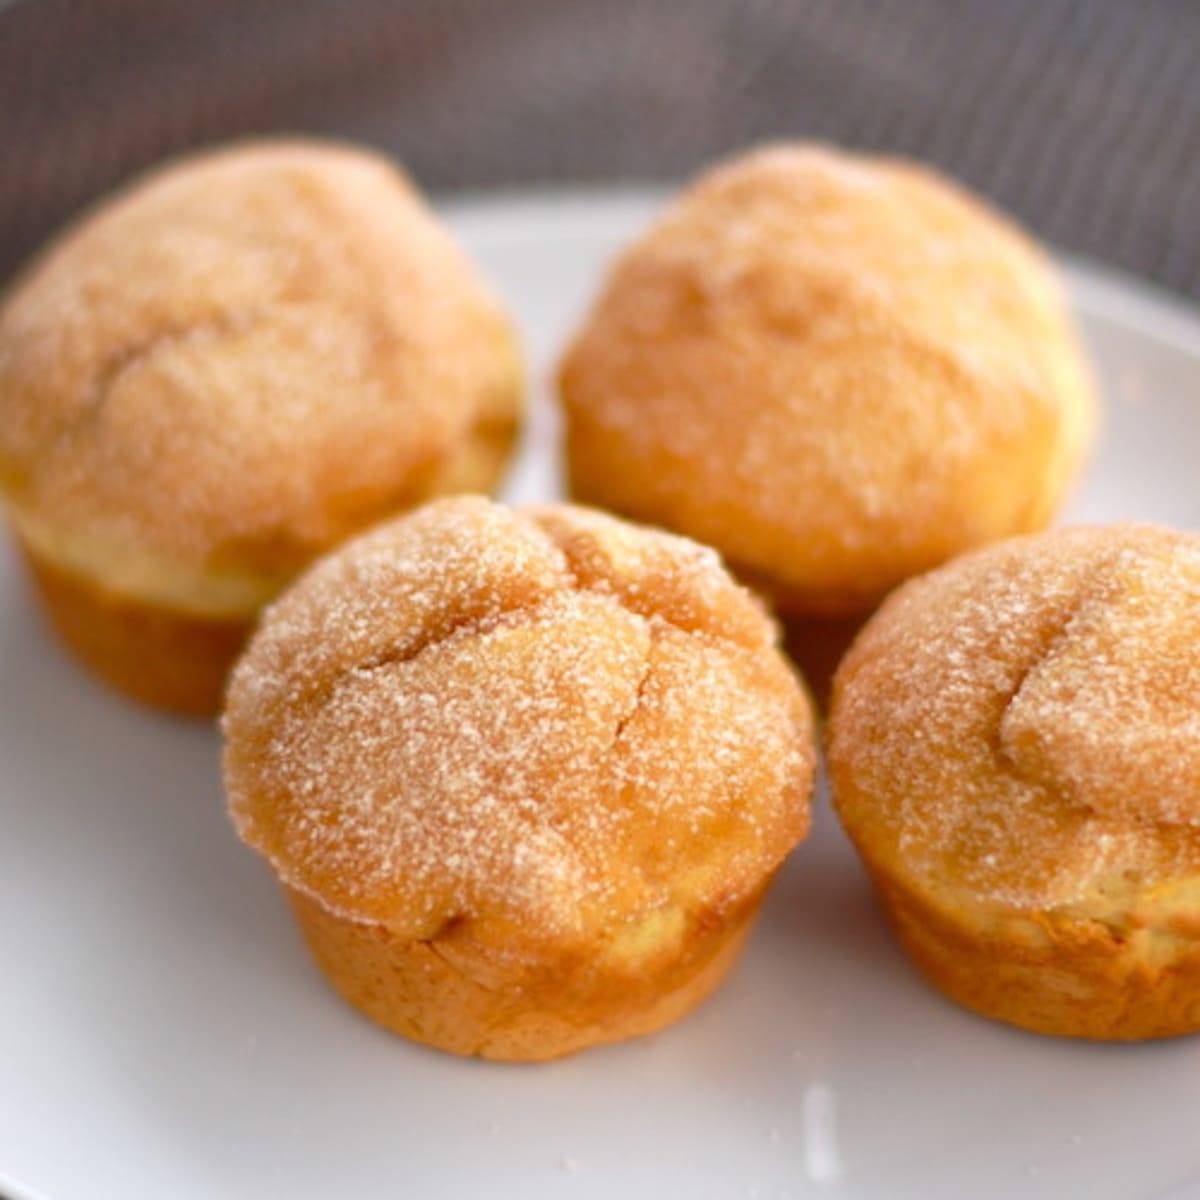 Sugar-dusted sweet potato muffins on a white plate.